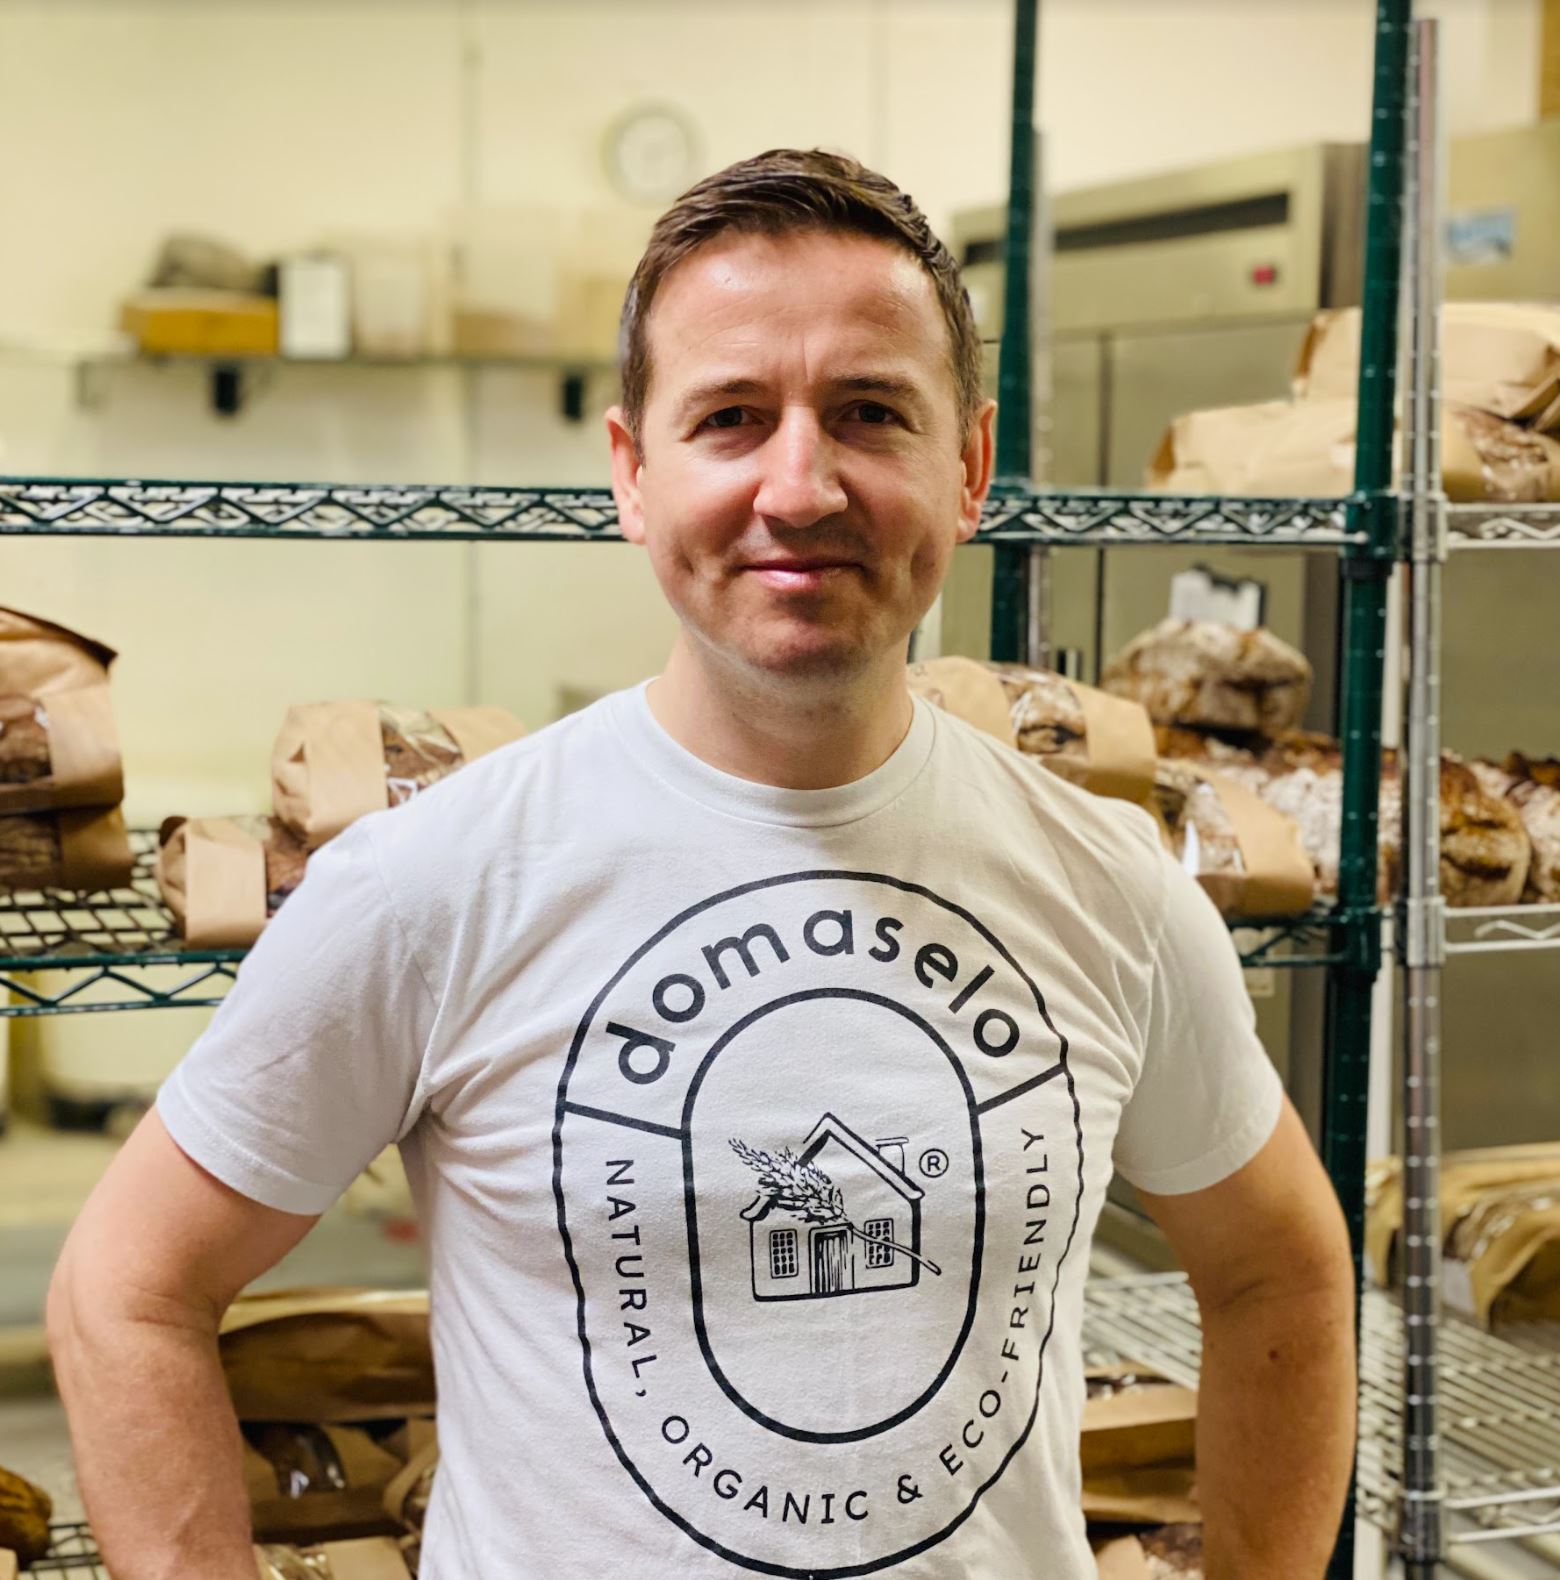 Emil wearing a Domaselo bread t shirt in the bakery